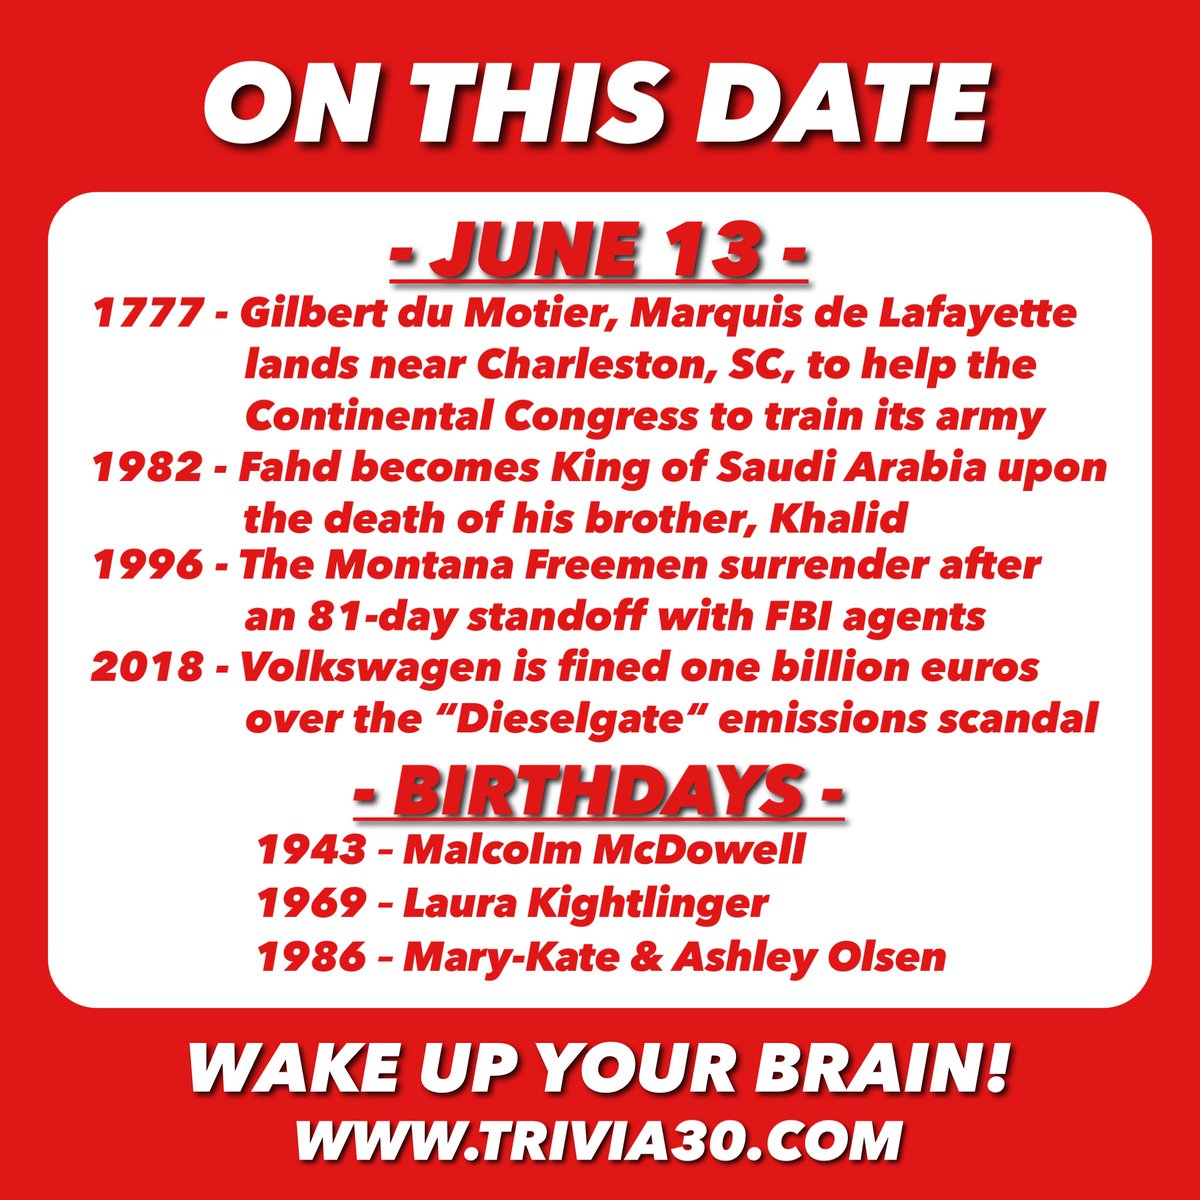 Your OTD trivia for 6/13. Have a great Monday, and we hope to see you all this week! #trivia30 #wakeupyourbrain #Trivia #OnThisDay #lafayette #AmericanRevolution #SaudiArabia #KingFahd #Montana #FBI #Volkswagen #MalcolmMcDowell #LauraKightlinger #SNL #OlsenTwins